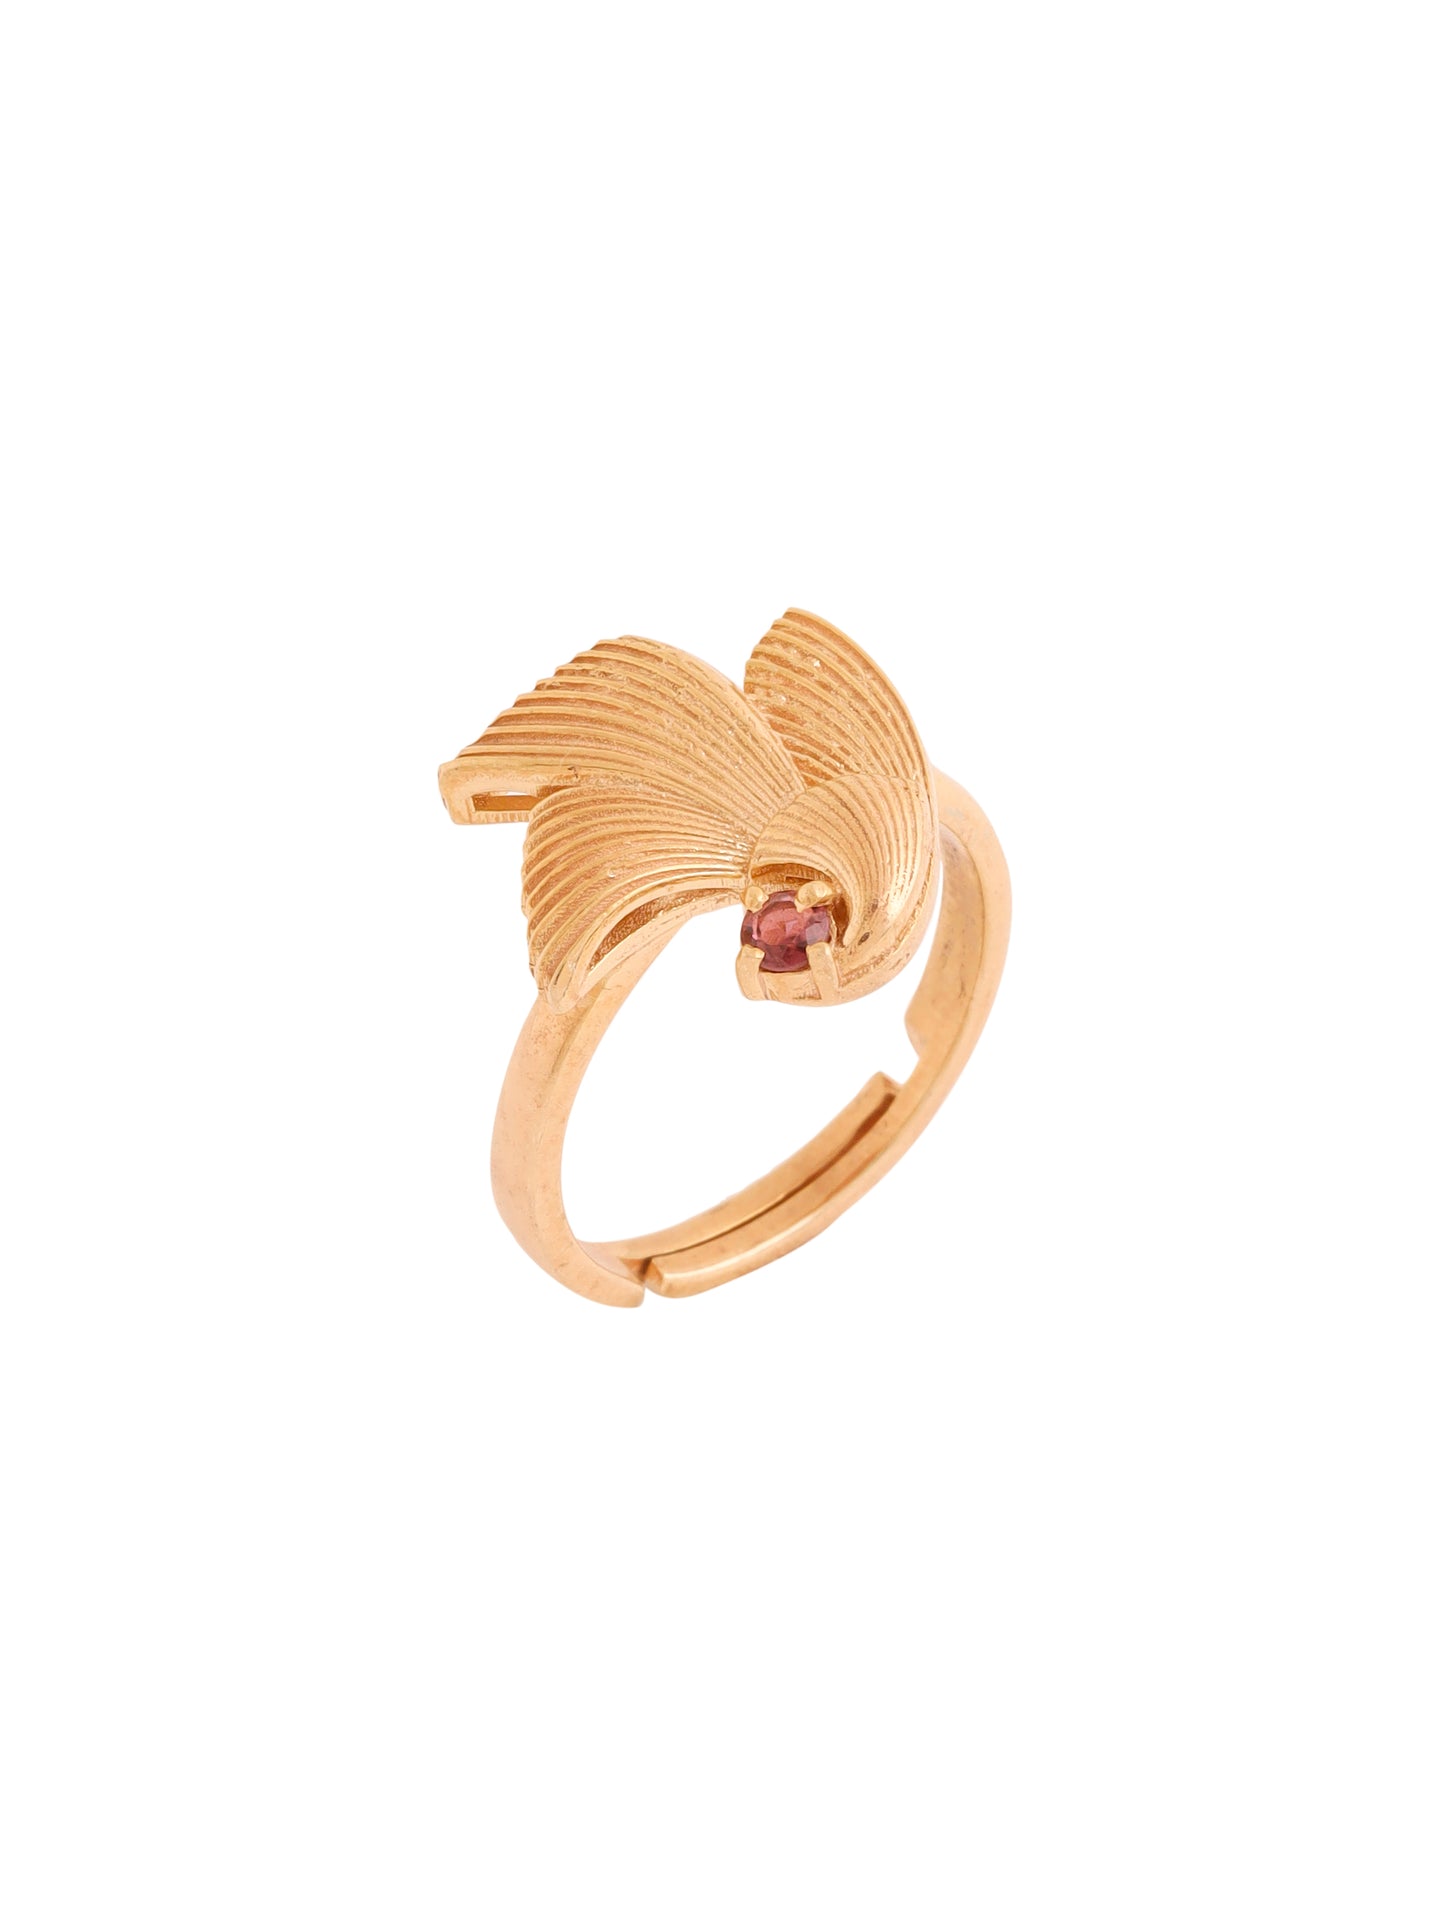 Kicky and Perky 925 Sterling silver Rose Gold Tourmaline Flower Petals Frills Adjustable Ring for Women